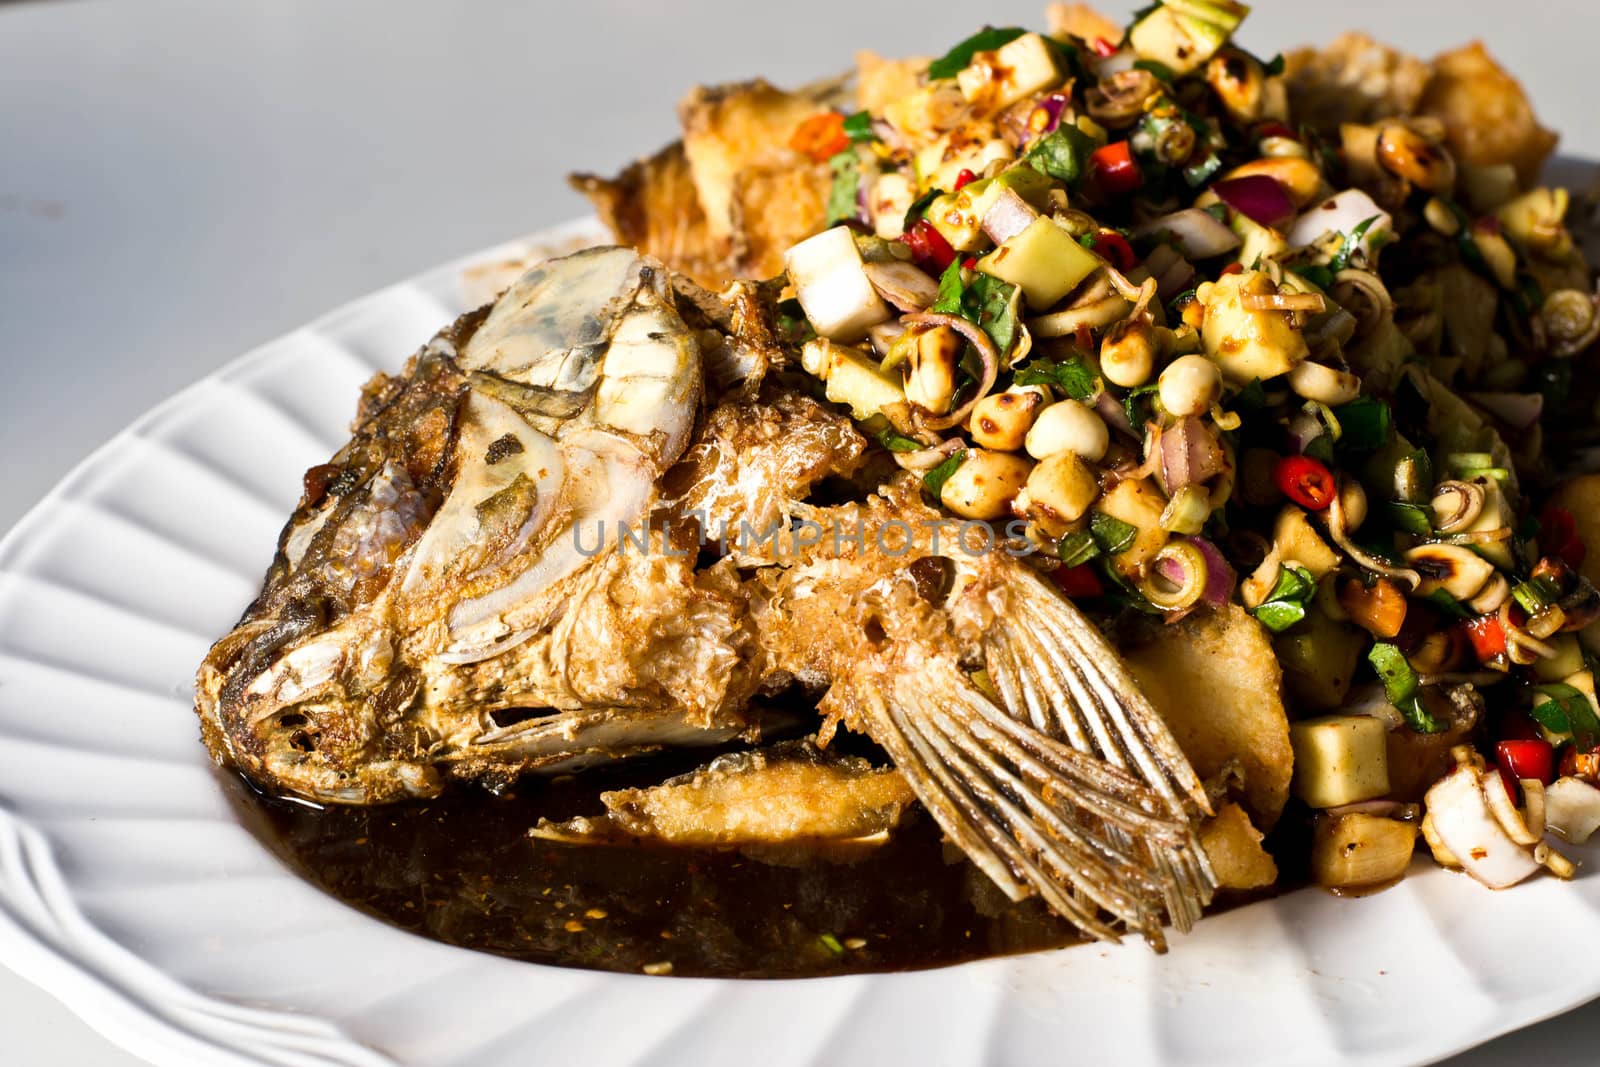 Fried tilapia and spices on dish